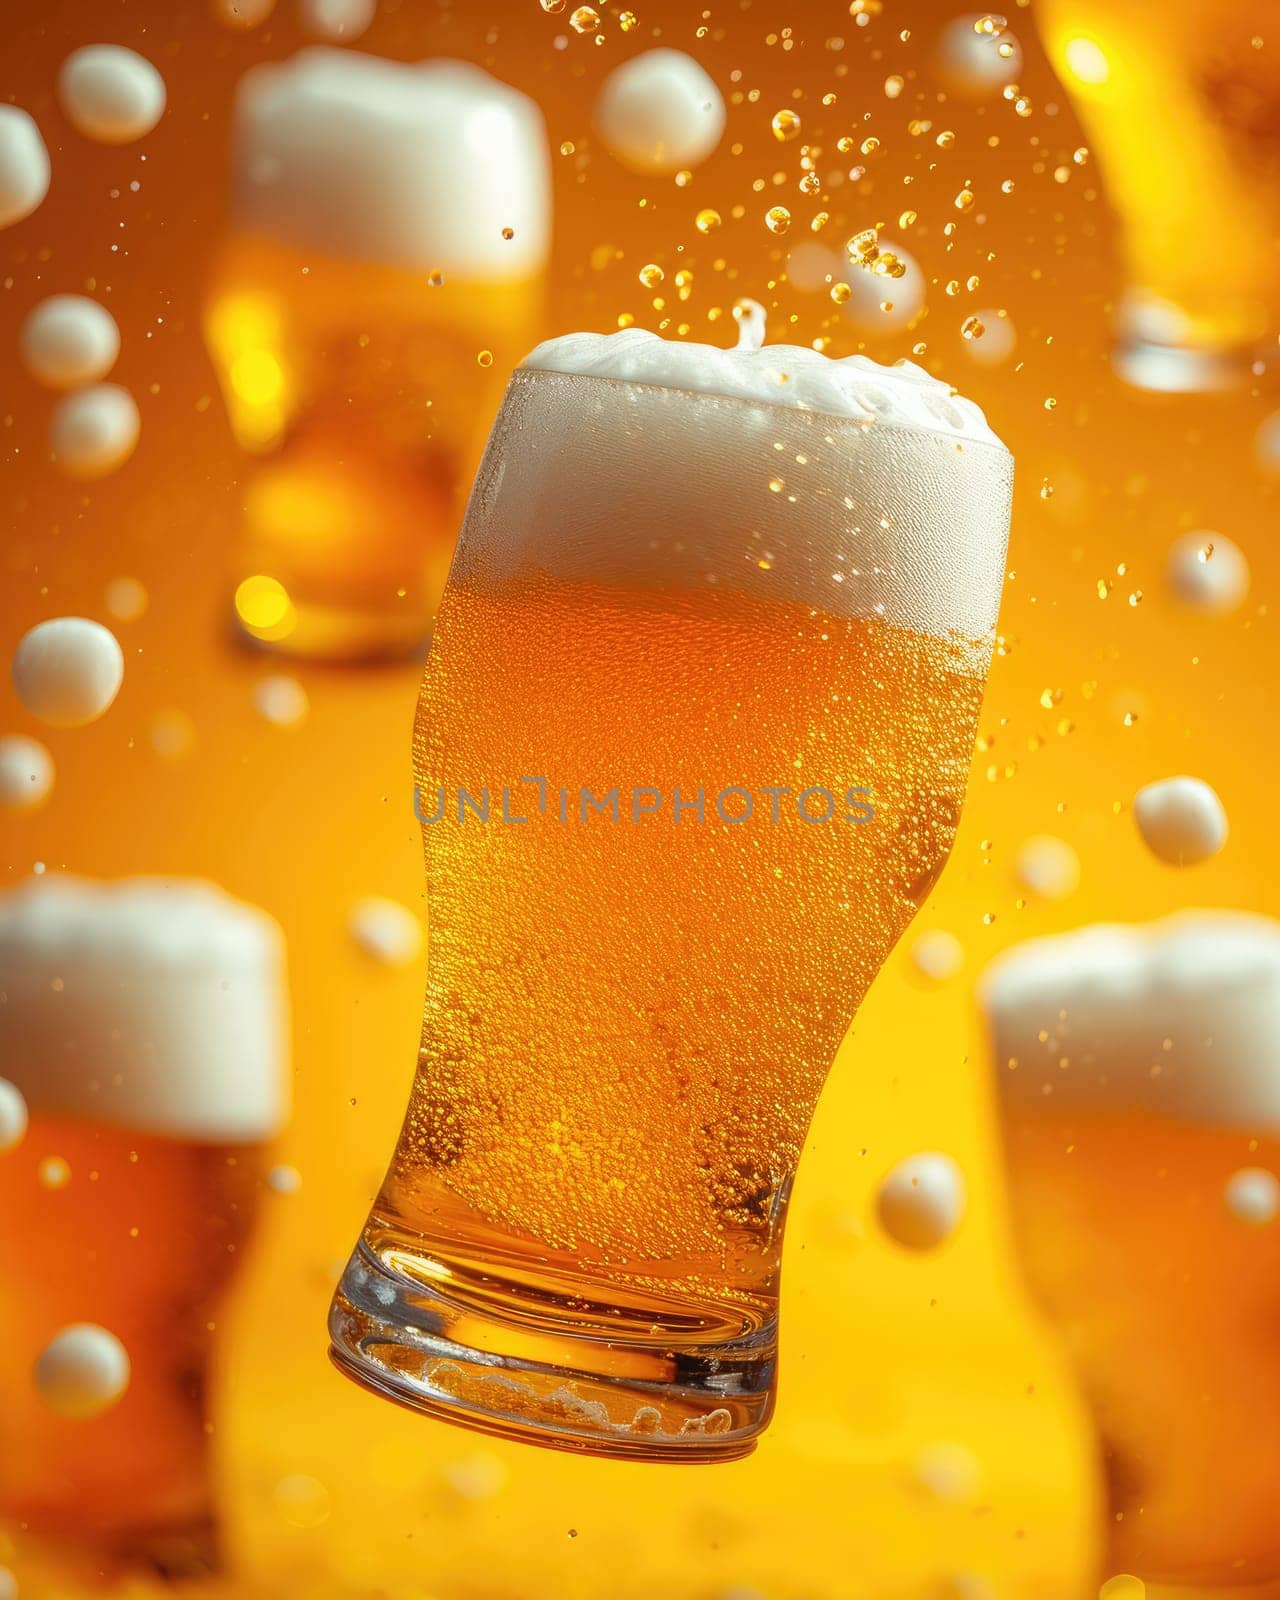 Floating glasses of beer bring lightness and joy to a bright yellow background